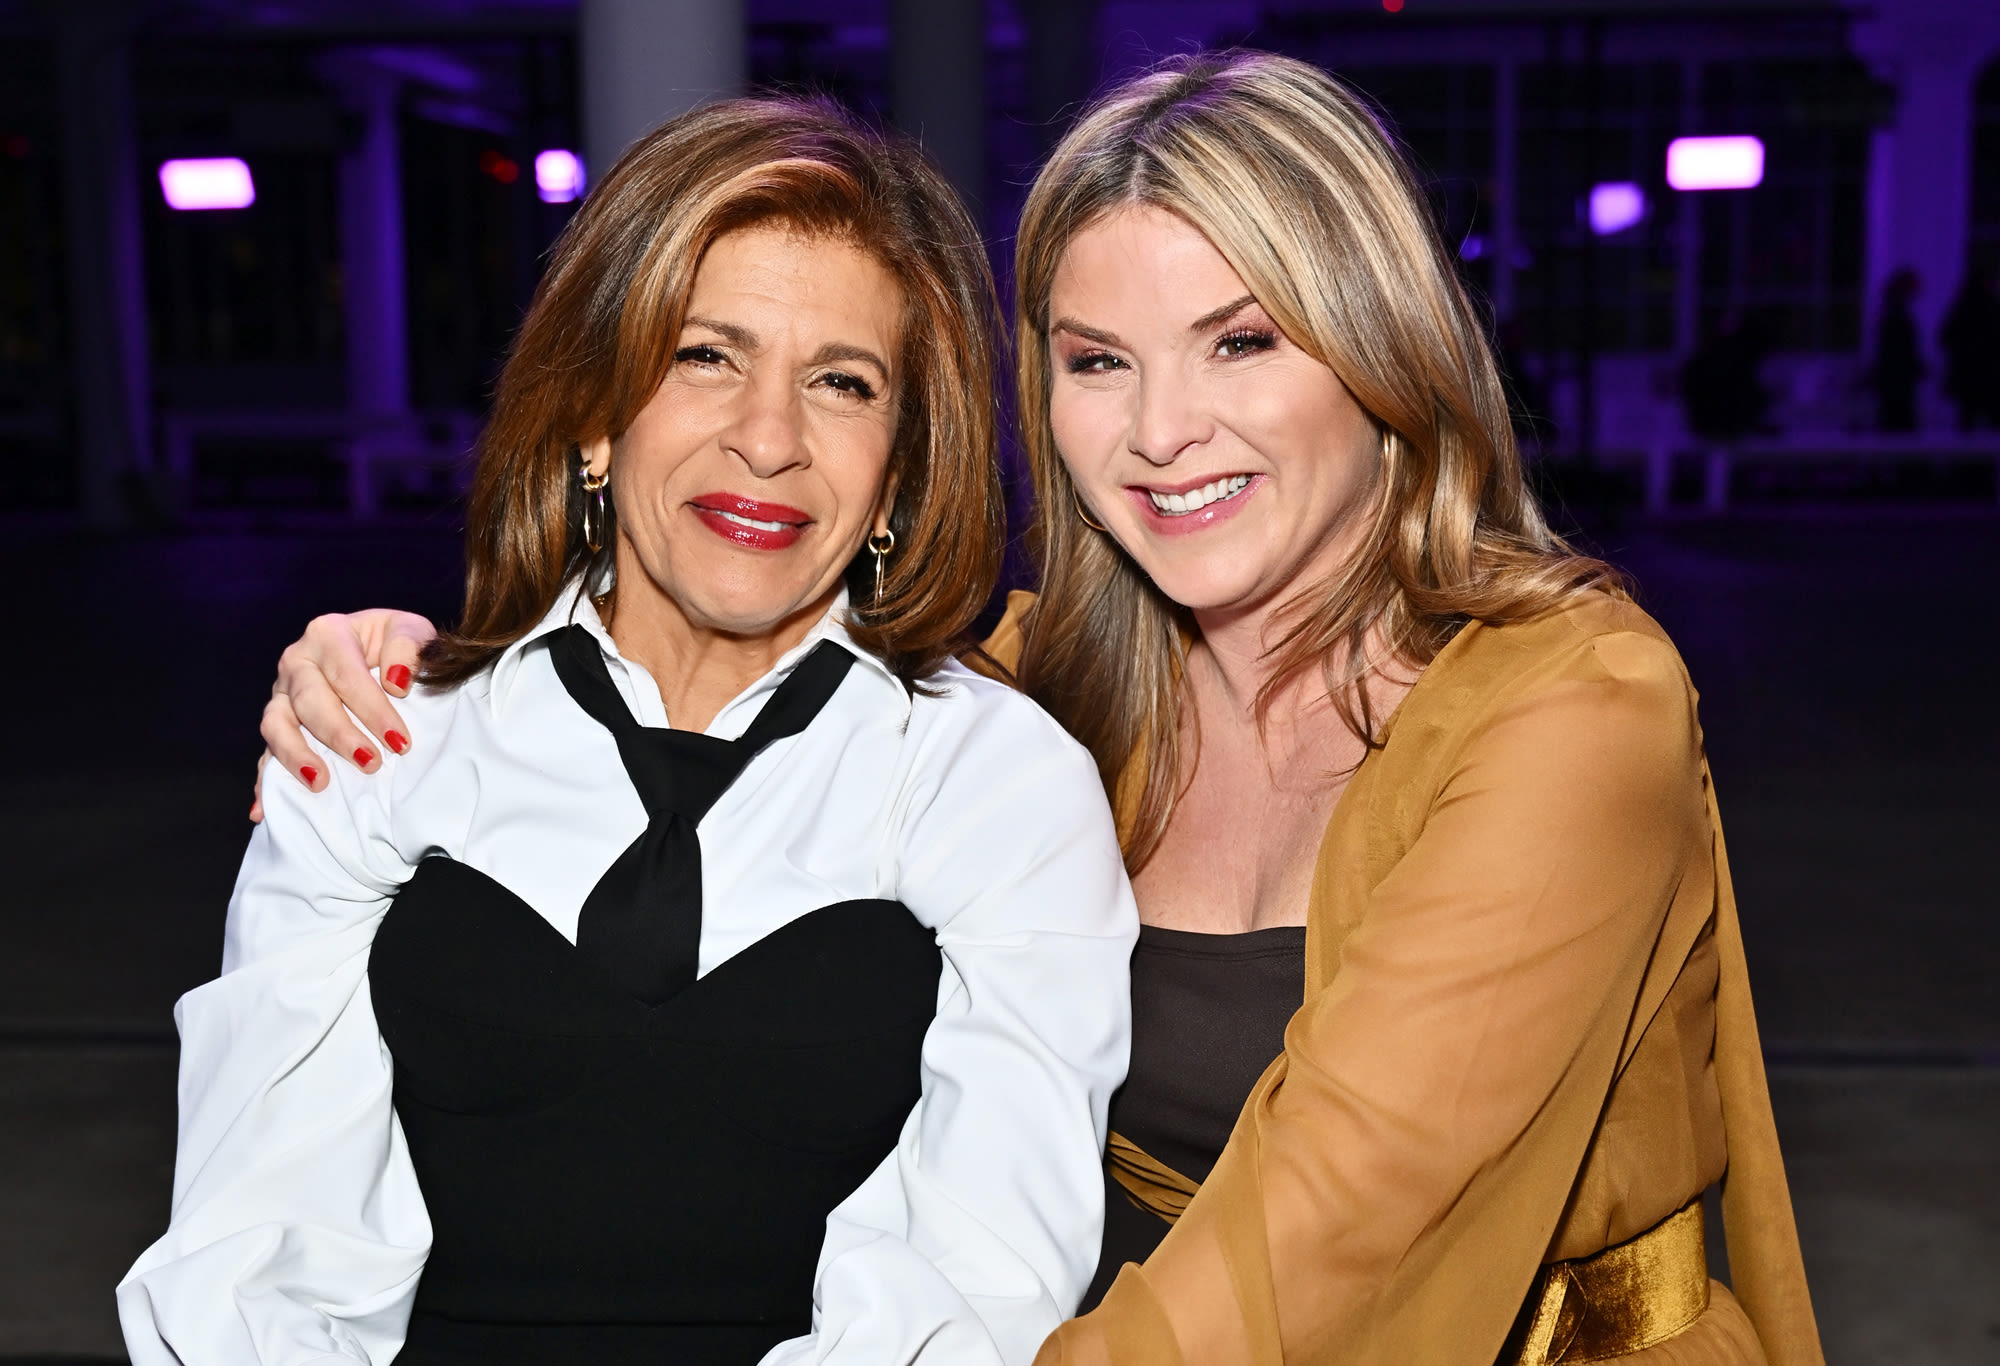 Today’s Hoda Kotb Tears Up as Jenna Bush Hager Shares ‘Really Beautiful’ Memory About Her Grandfather